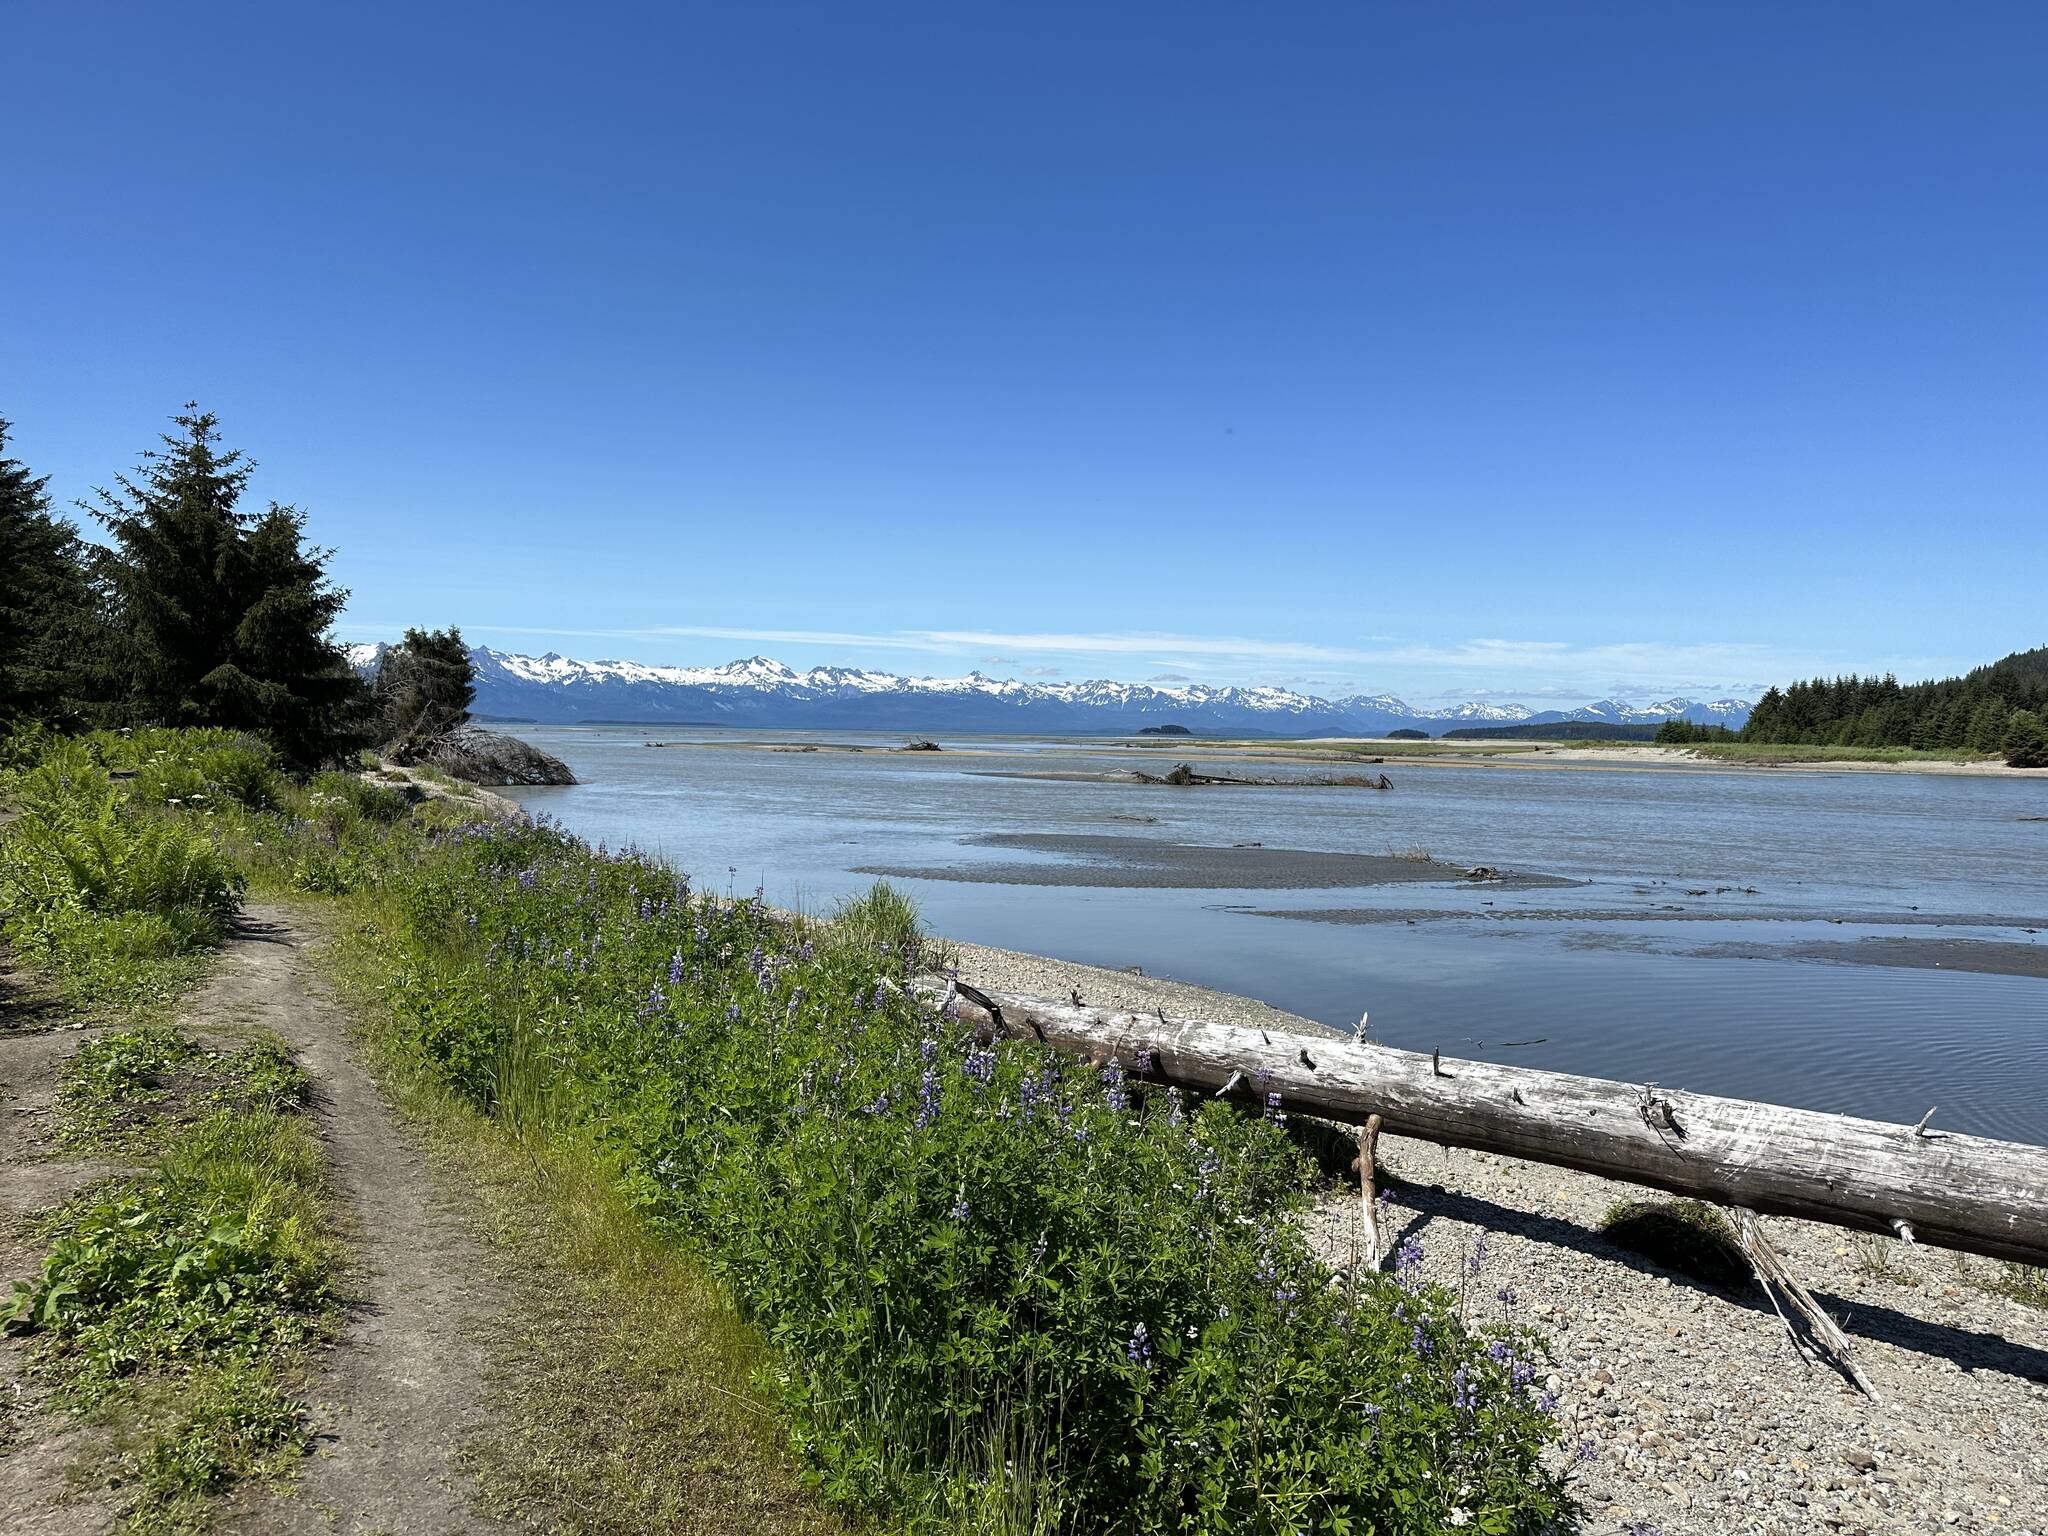 A beach view along the along the Boy Scout Beach Trail on July 8. (Photo by Deana Barajas)